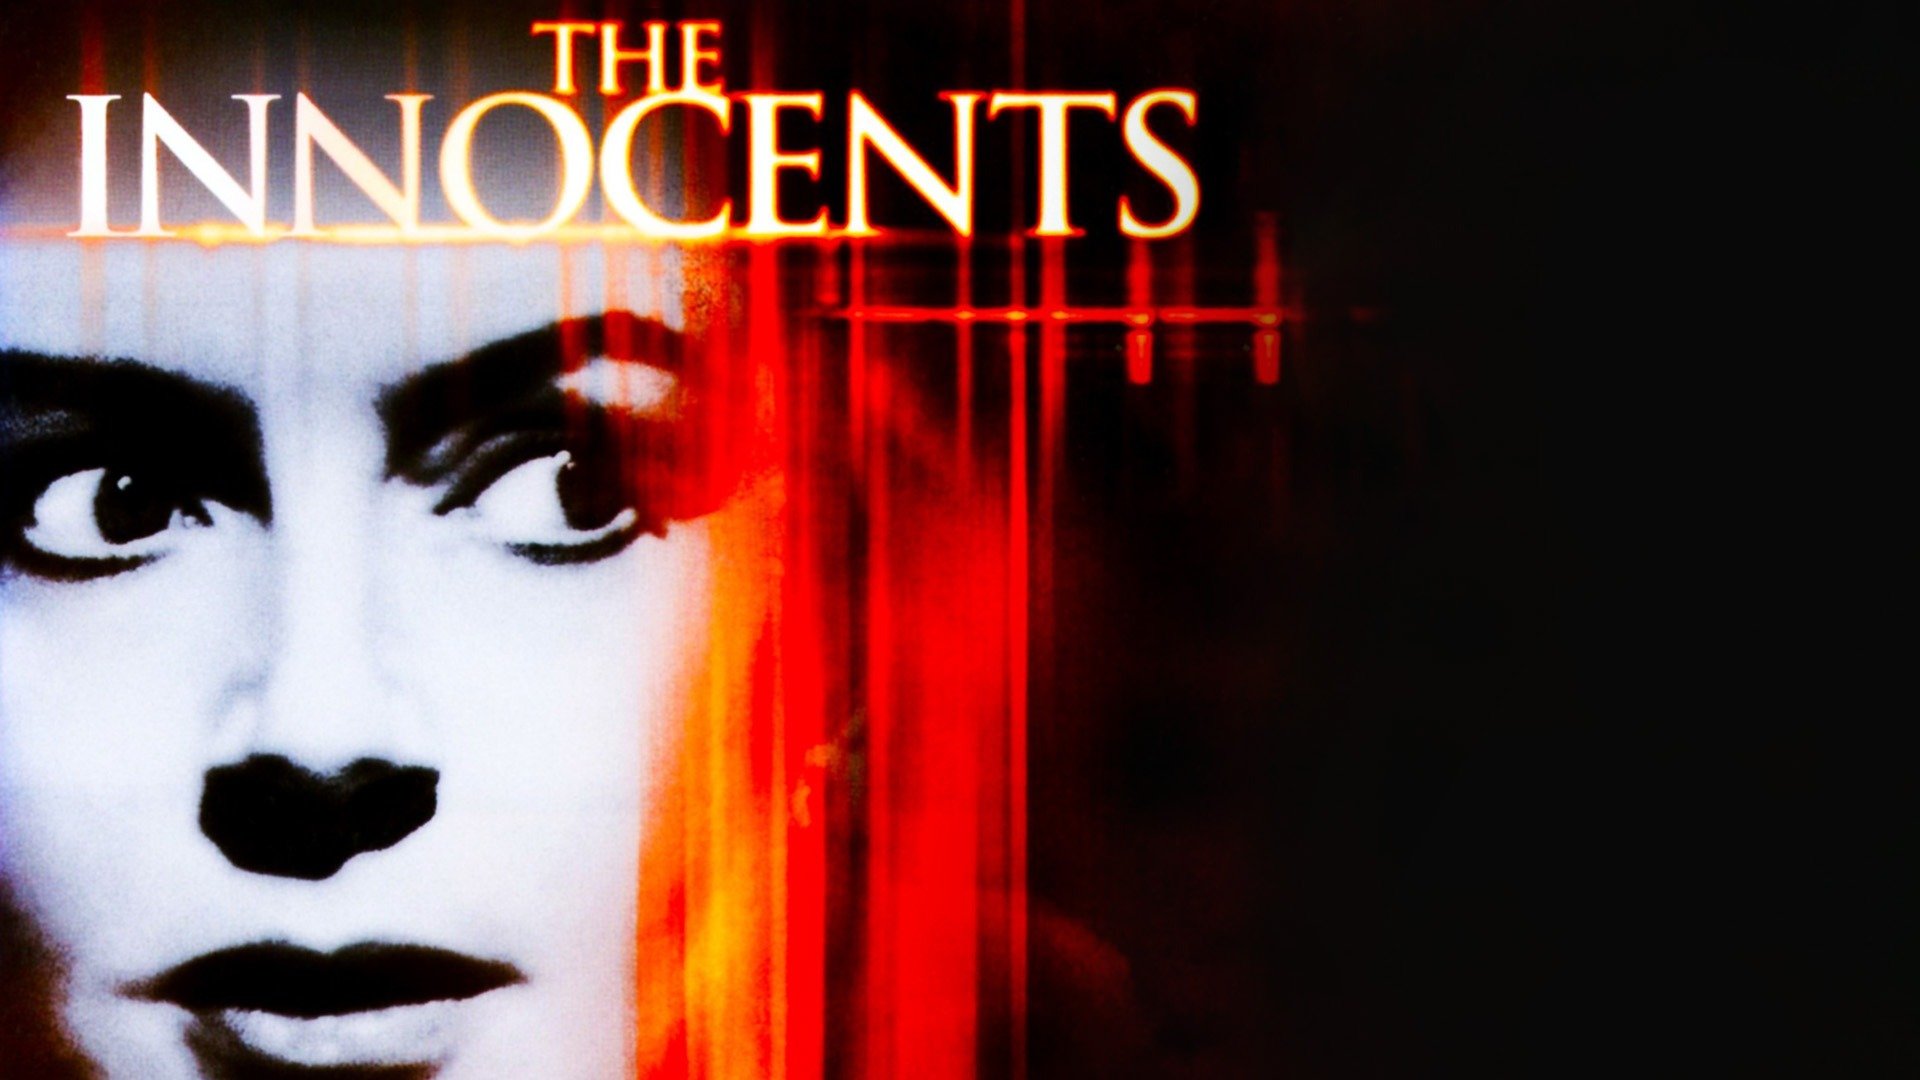 The Innocents Trailer 1 Trailers And Videos Rotten Tomatoes